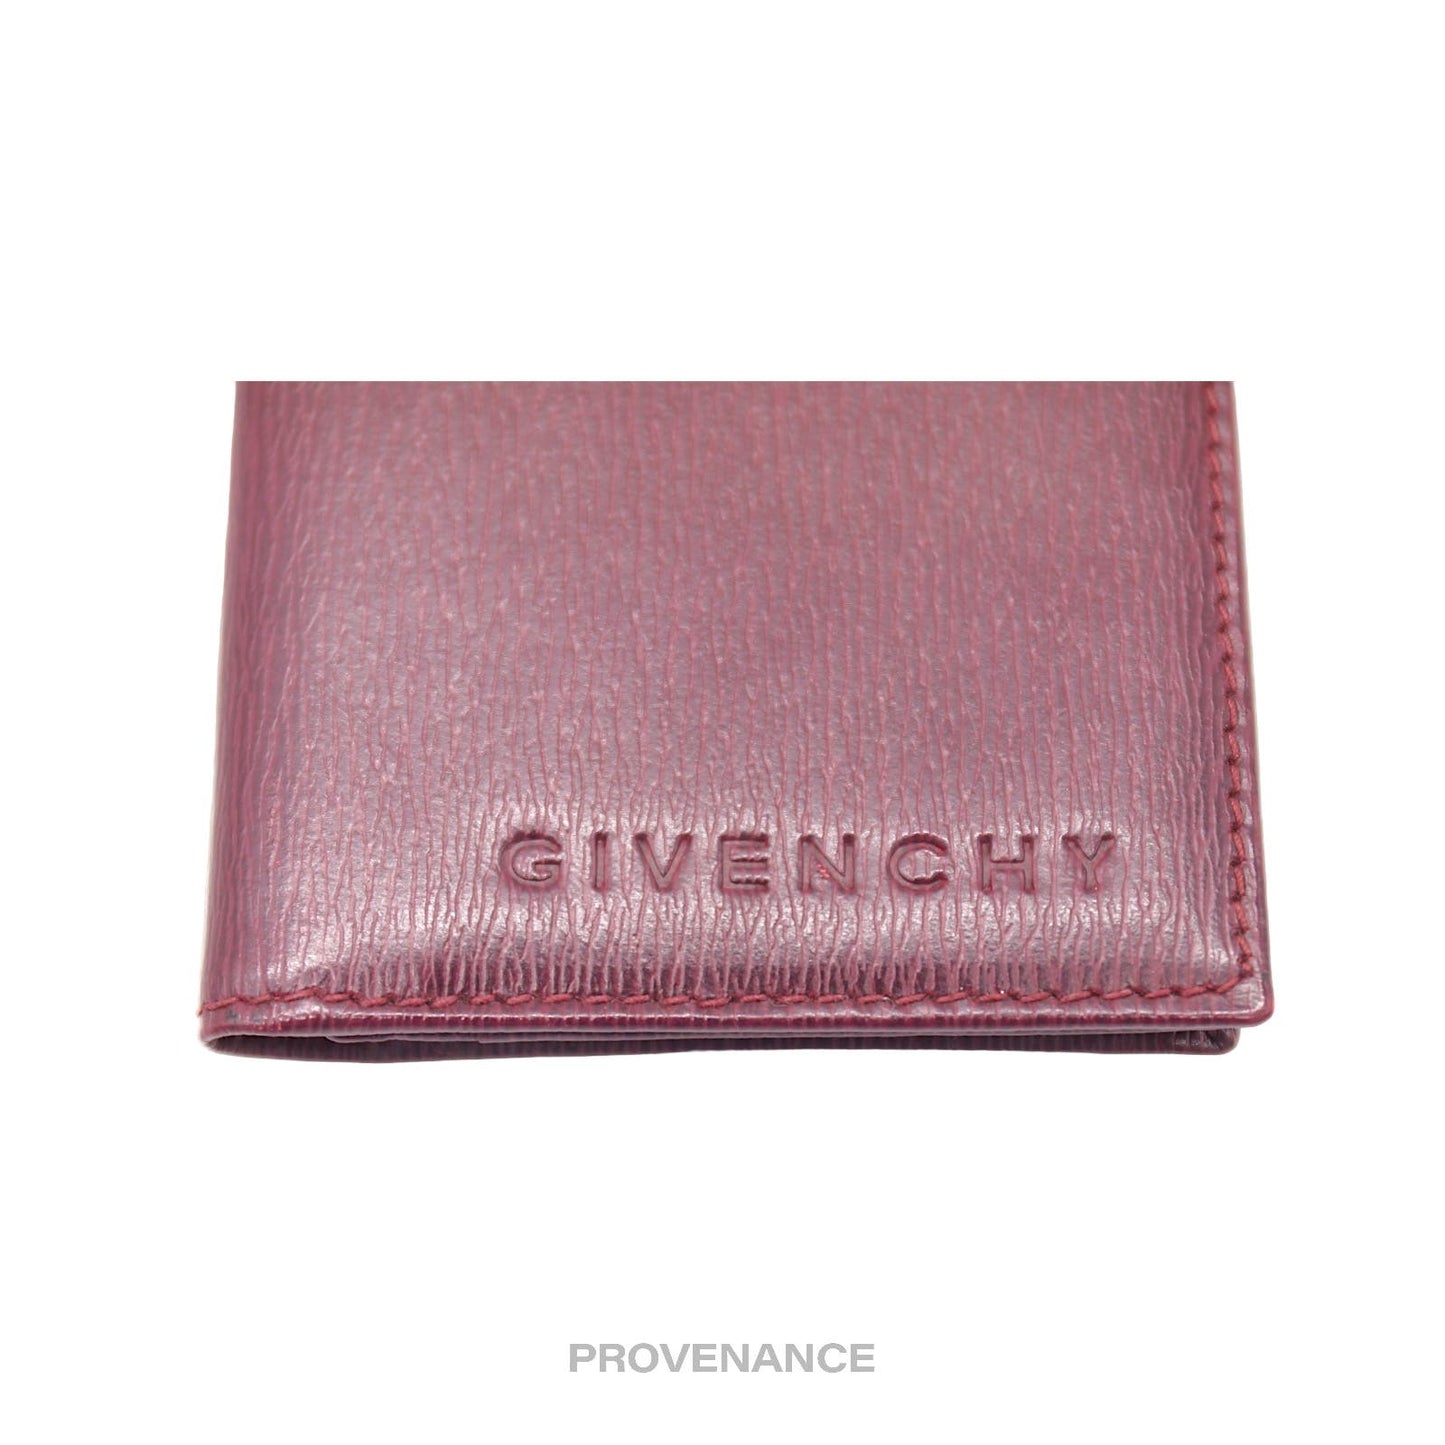 🔴 Givenchy Logo ID Pocket Organizer Wallet - Red Leather